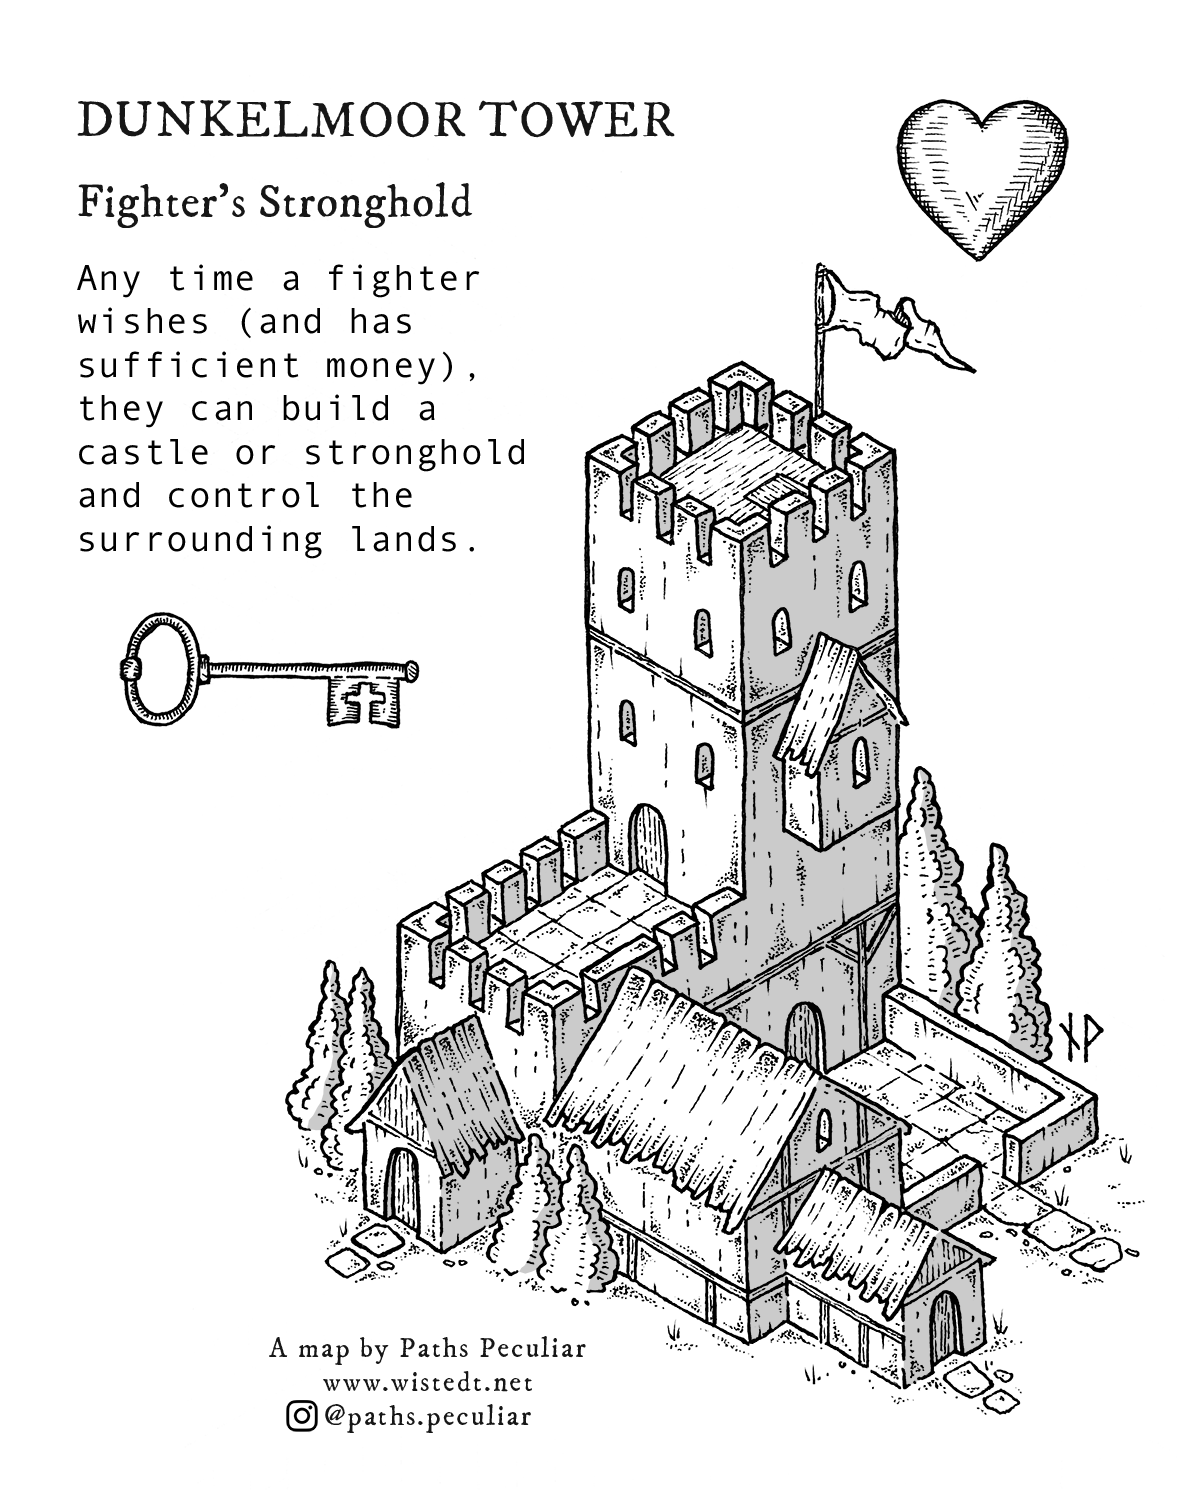 Dunkelmoor Tower – Fighter’s Stronghold isometric map